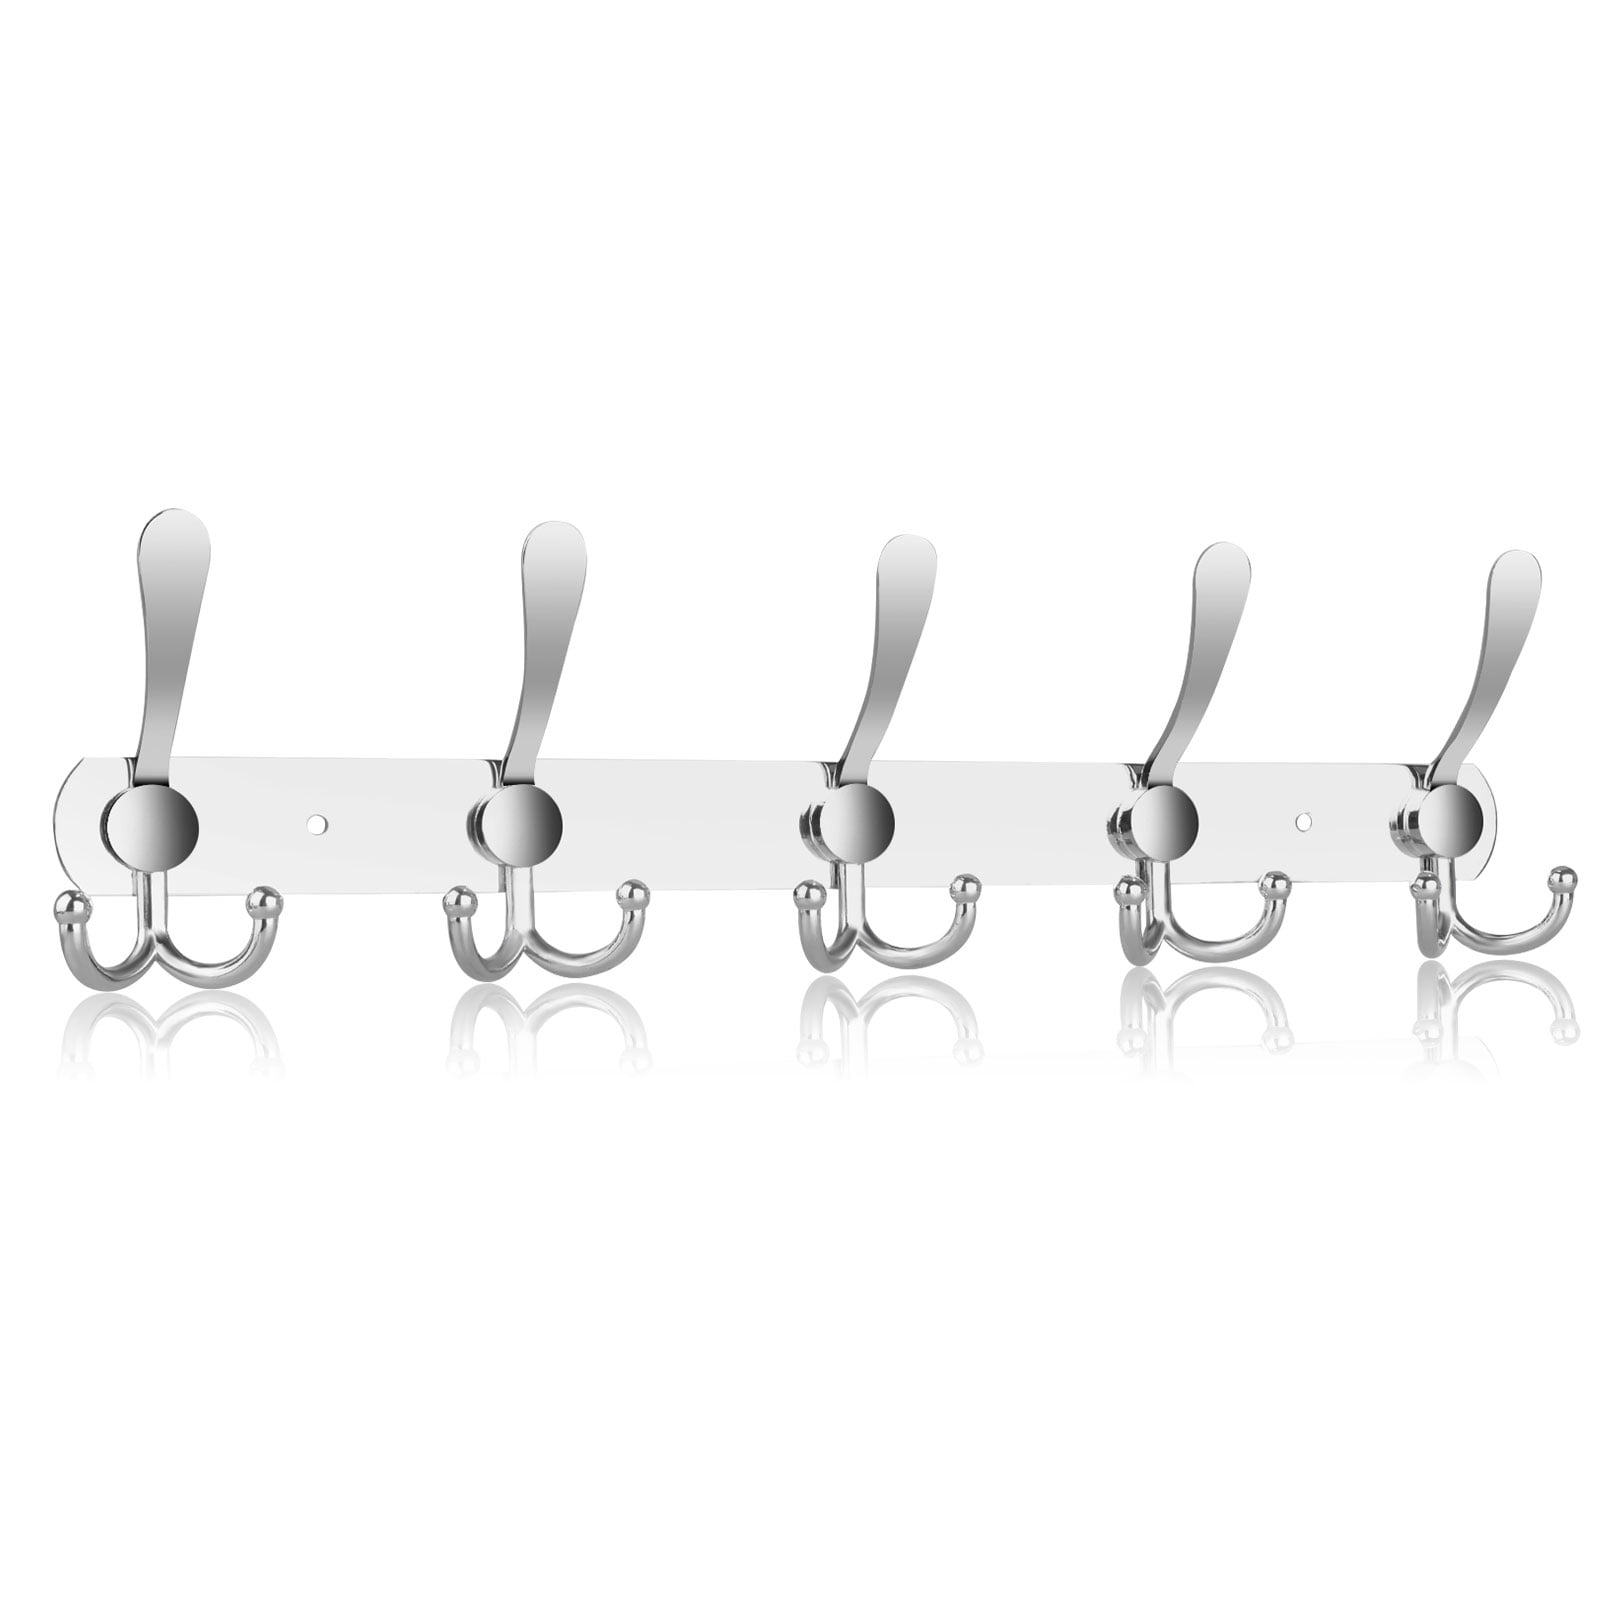 3 Hooks Coat Hook Wall Mounted Wall Hanger Clothes Rack Robe Chrome Gold Satin 